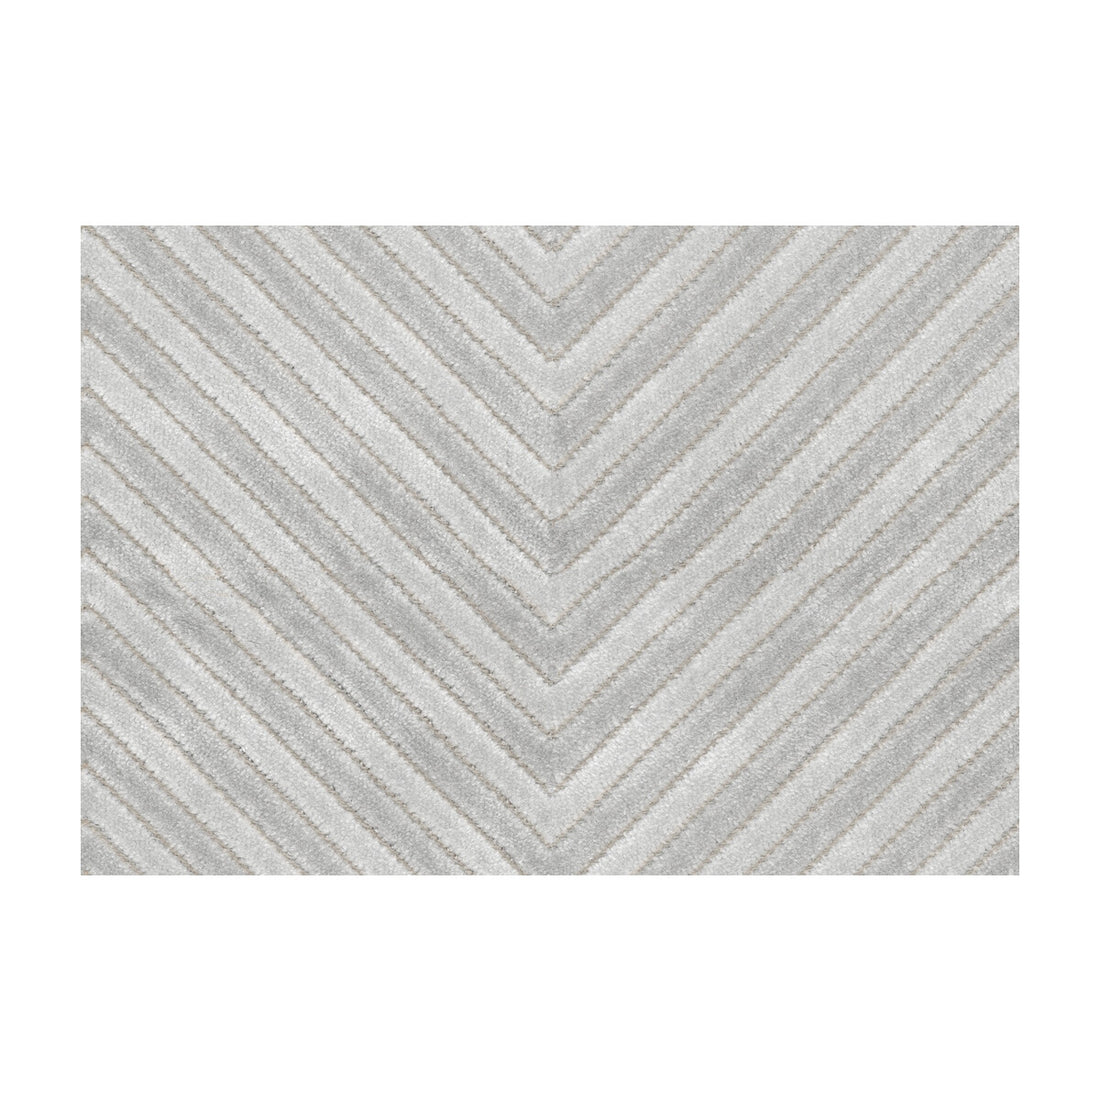 Zigandzag fabric in silver color - pattern 34272.11.0 - by Kravet Basics in the Sarah Richardson Harmony collection